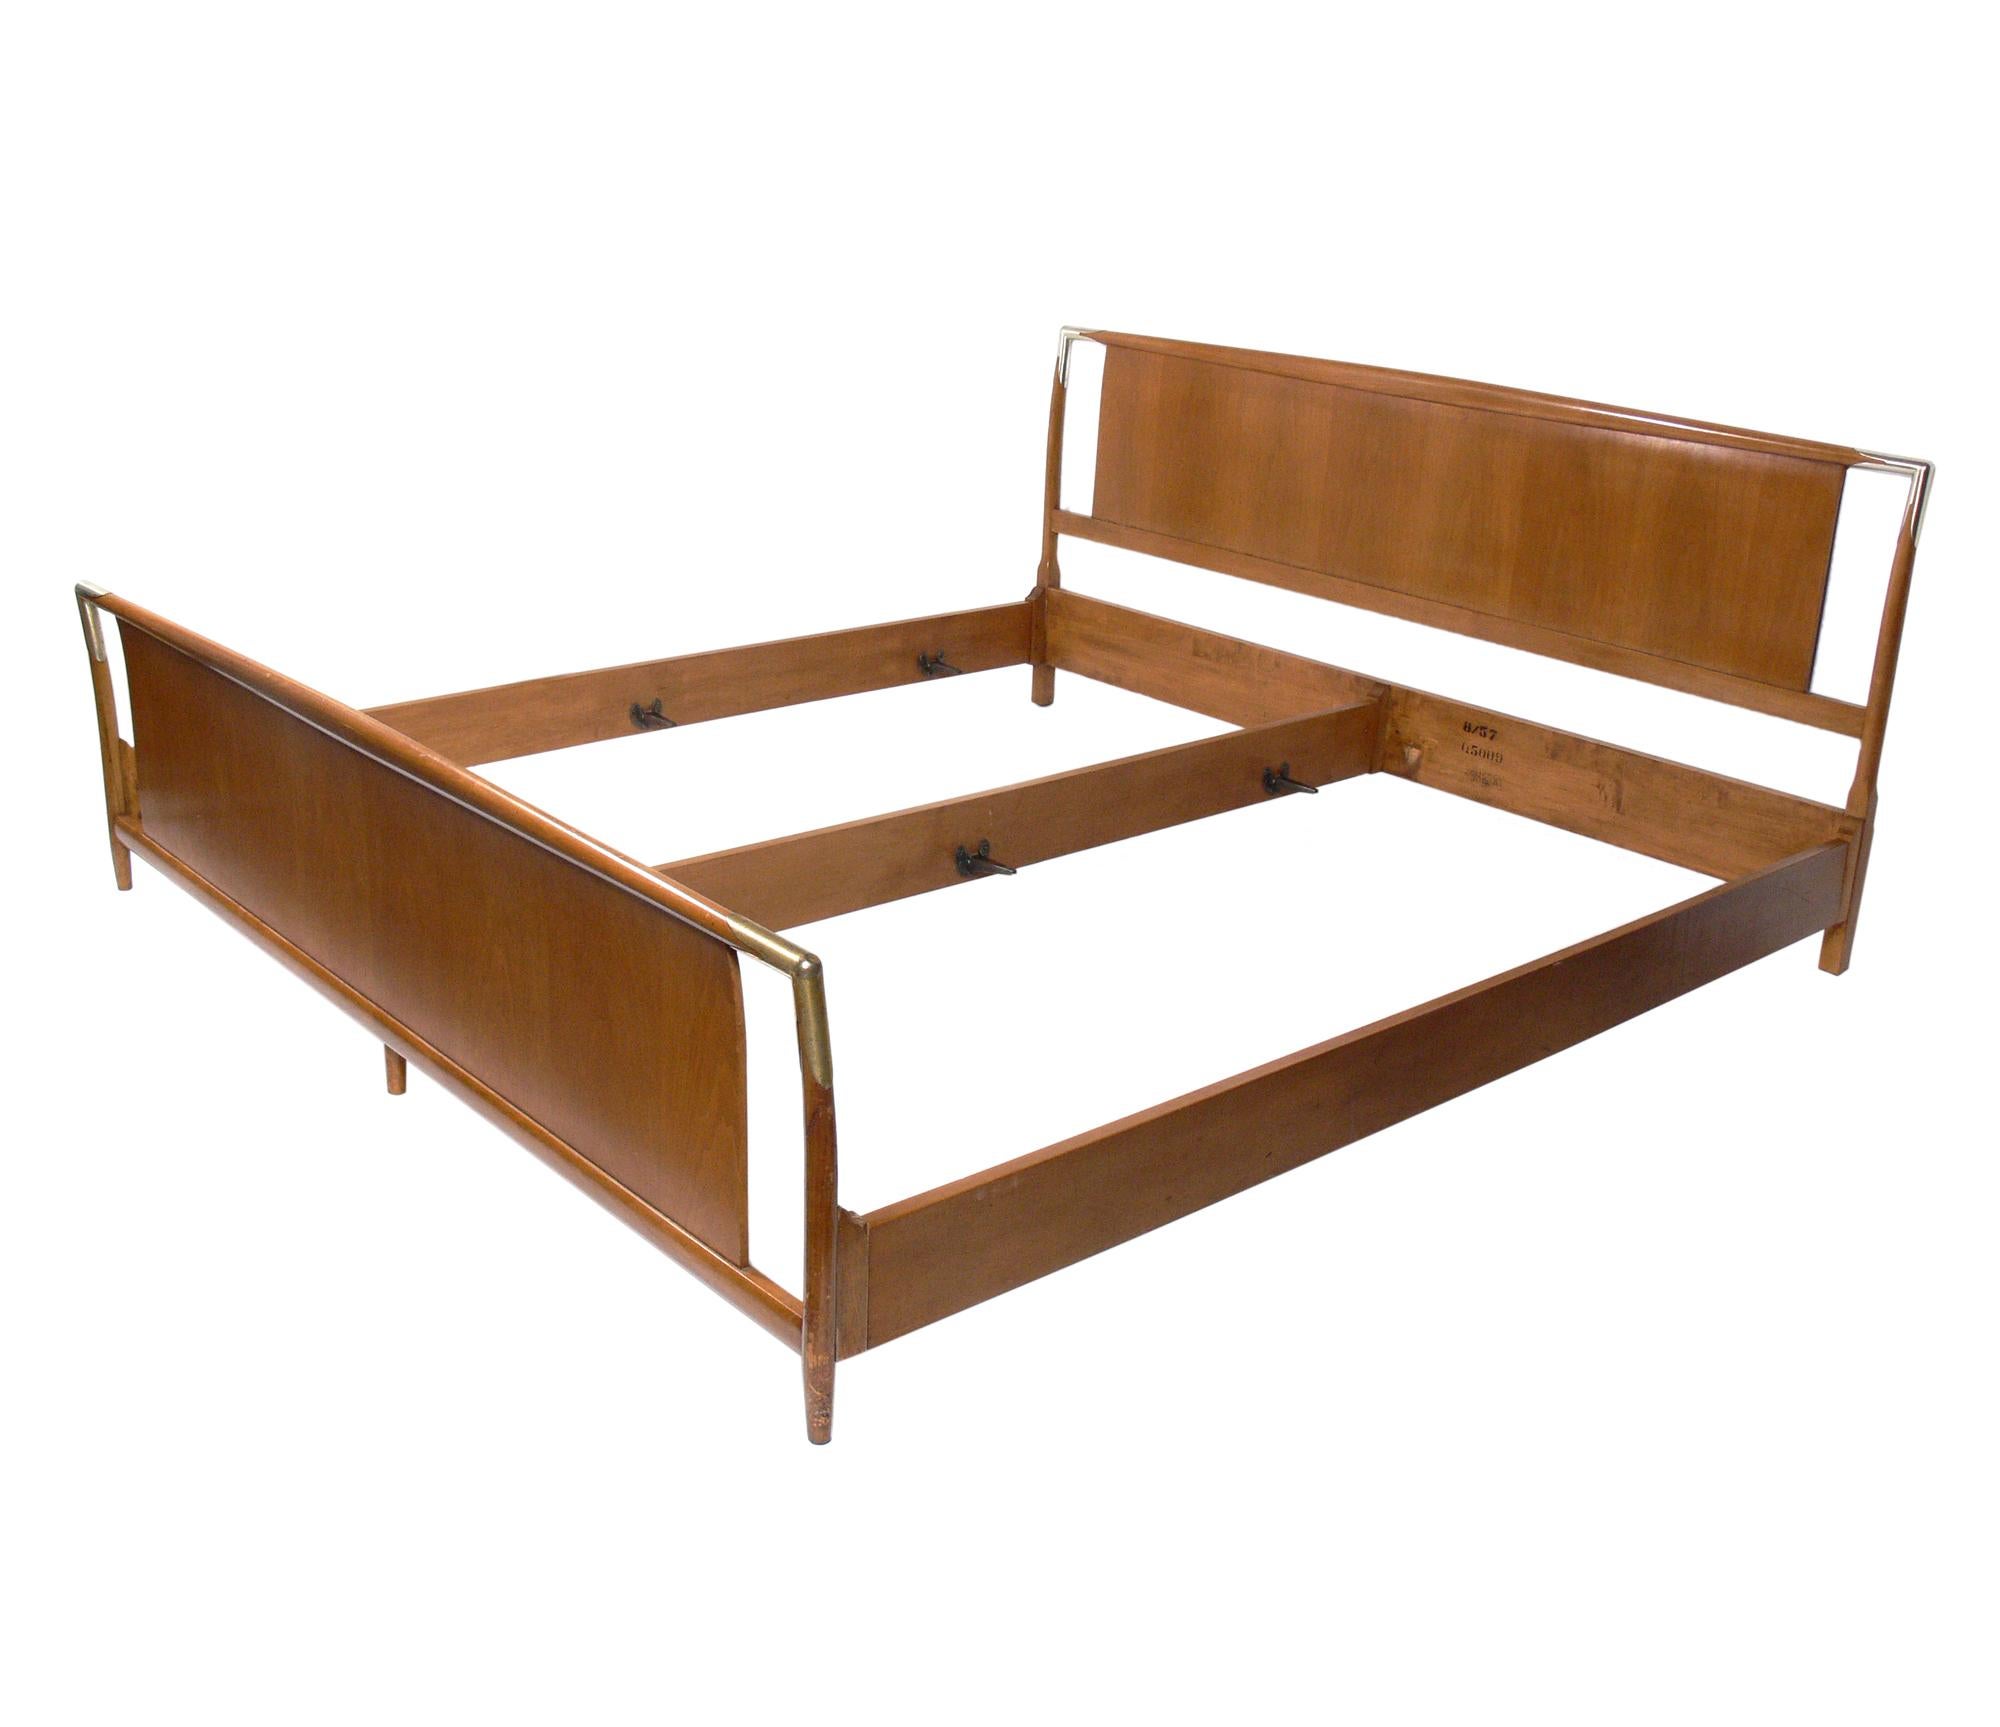 King size bed, designed by T.H. Robsjohn-Gibbings for Widdicomb, American, circa 1950s. This piece retains its original finish with warm original patina. If you would prefer it refinished, we can refinish in your choice of color and polish the